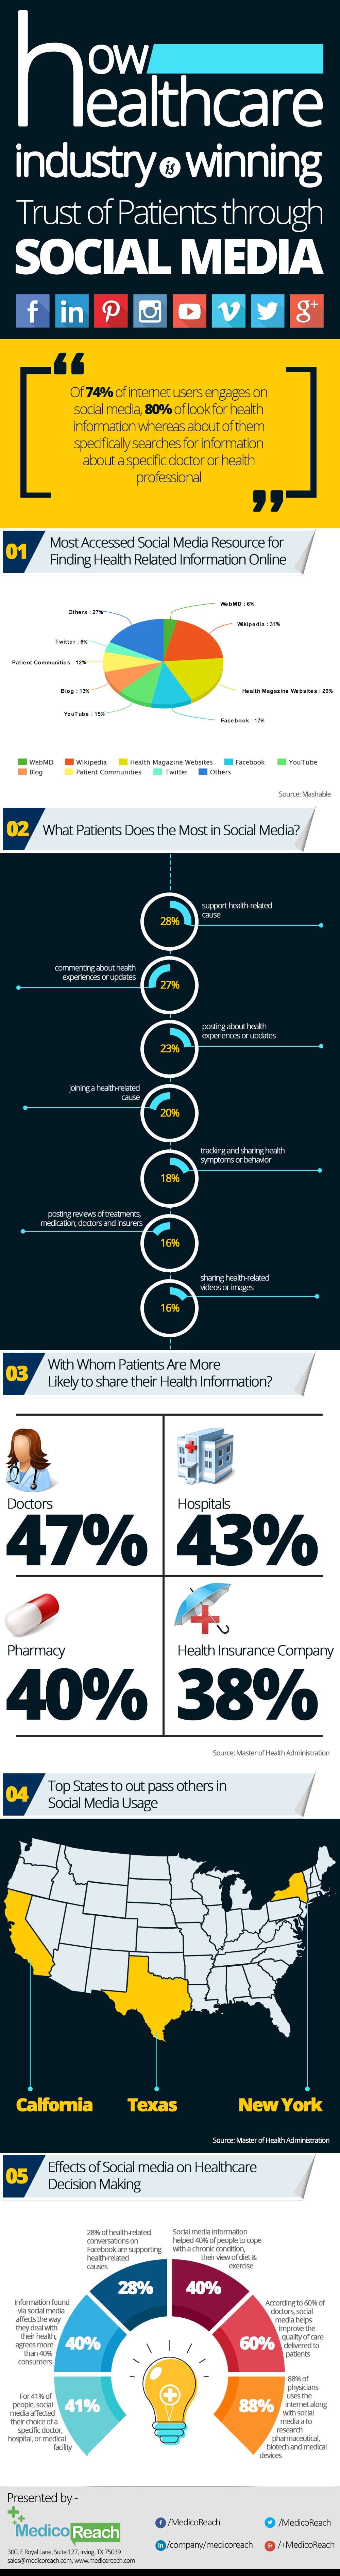 how healthcare industry is winning the trust of patients through social media